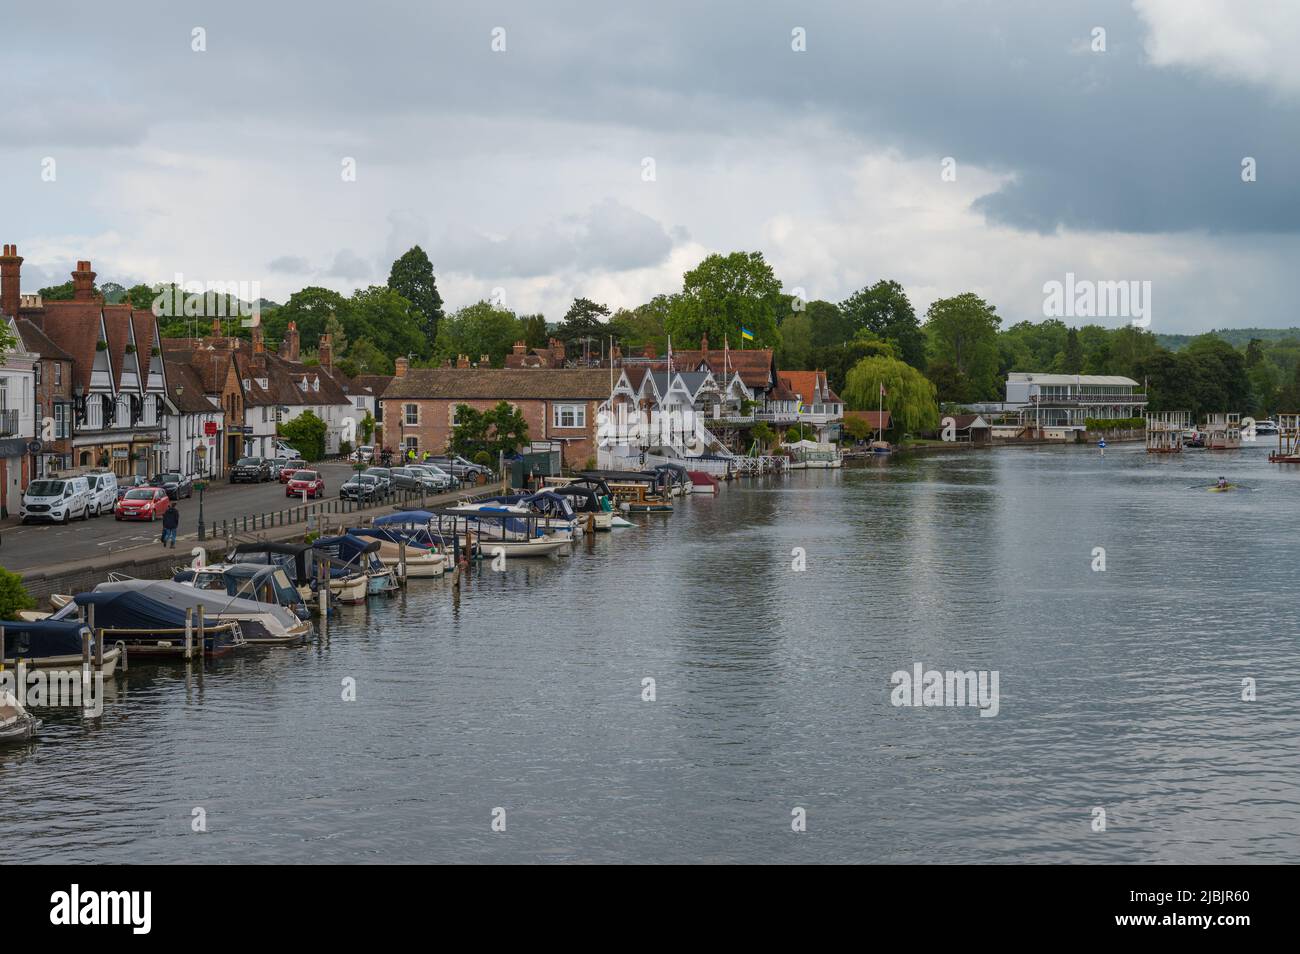 View along the River Thames from Henley Bridge on a dull, cloudy day. Rowers on the water in double scull. Henley on Thames, Oxfordshire, England, UK Stock Photo